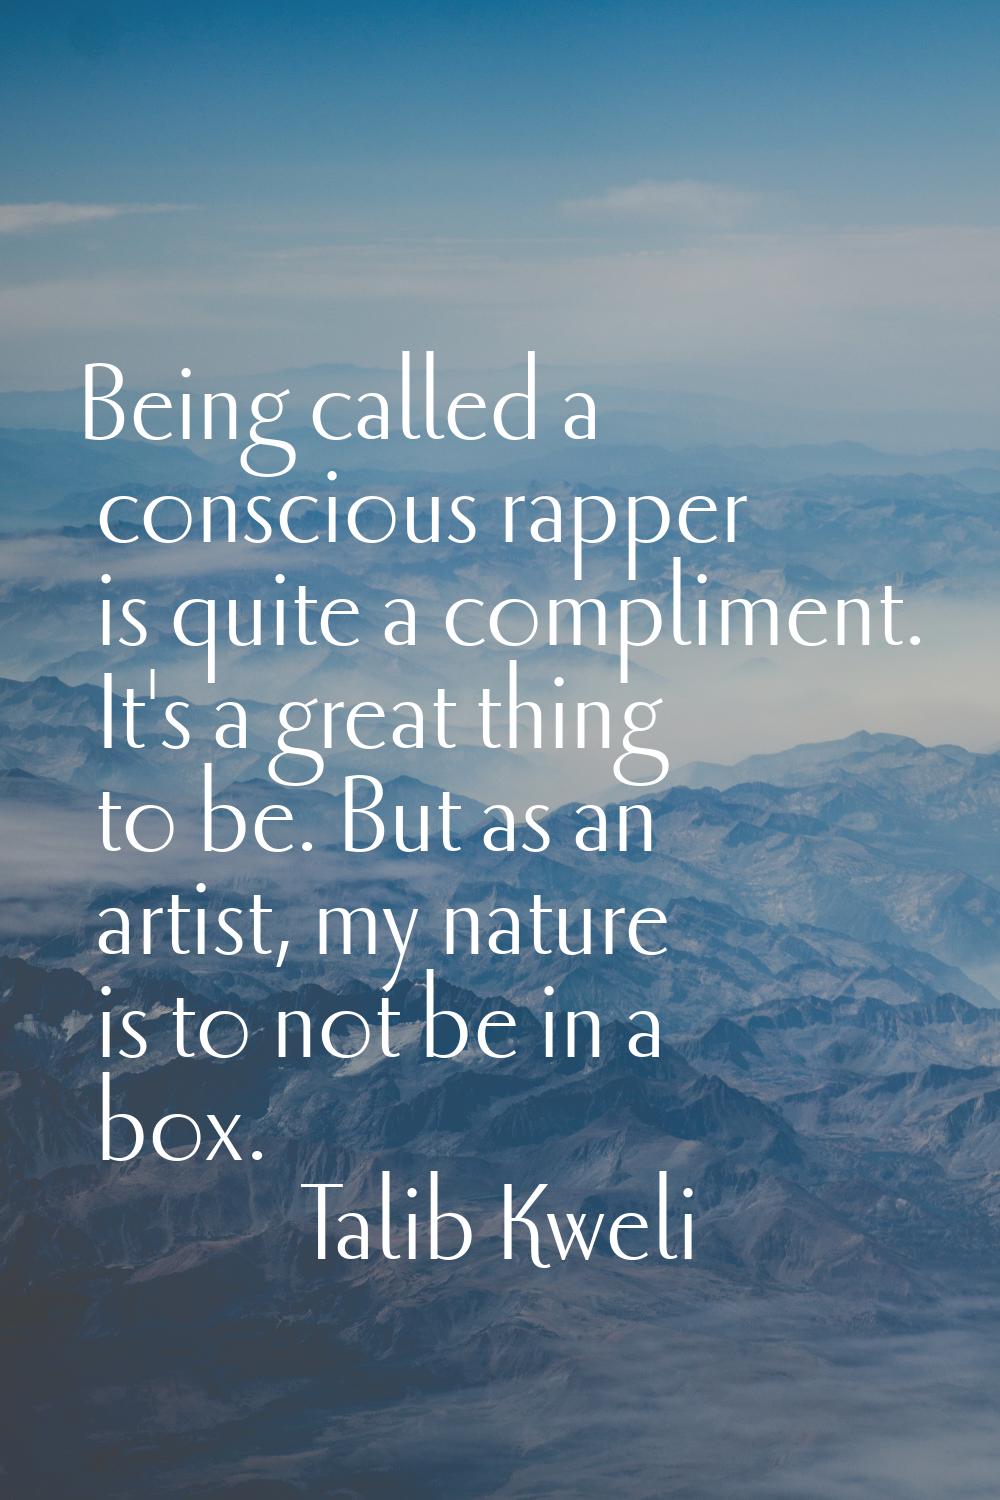 Being called a conscious rapper is quite a compliment. It's a great thing to be. But as an artist, 